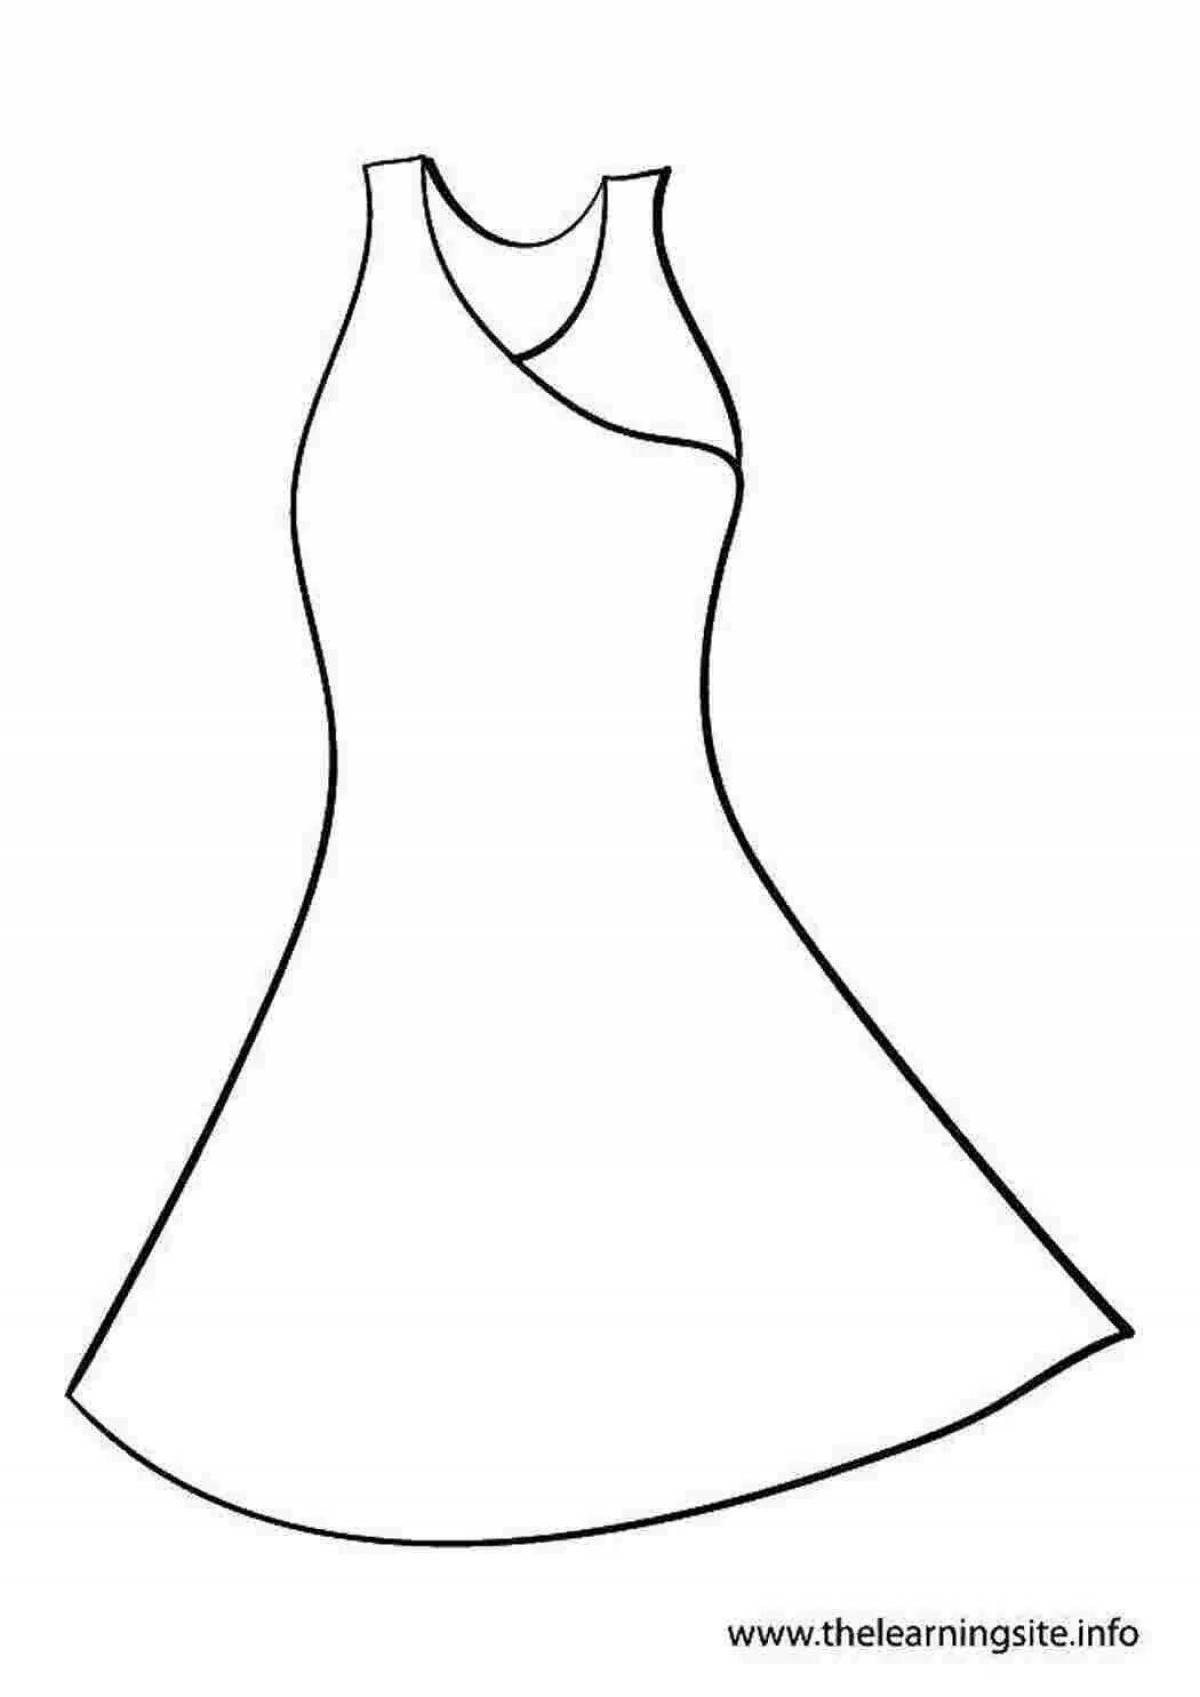 Coloring page with spectacular dress for children 4-5 years old